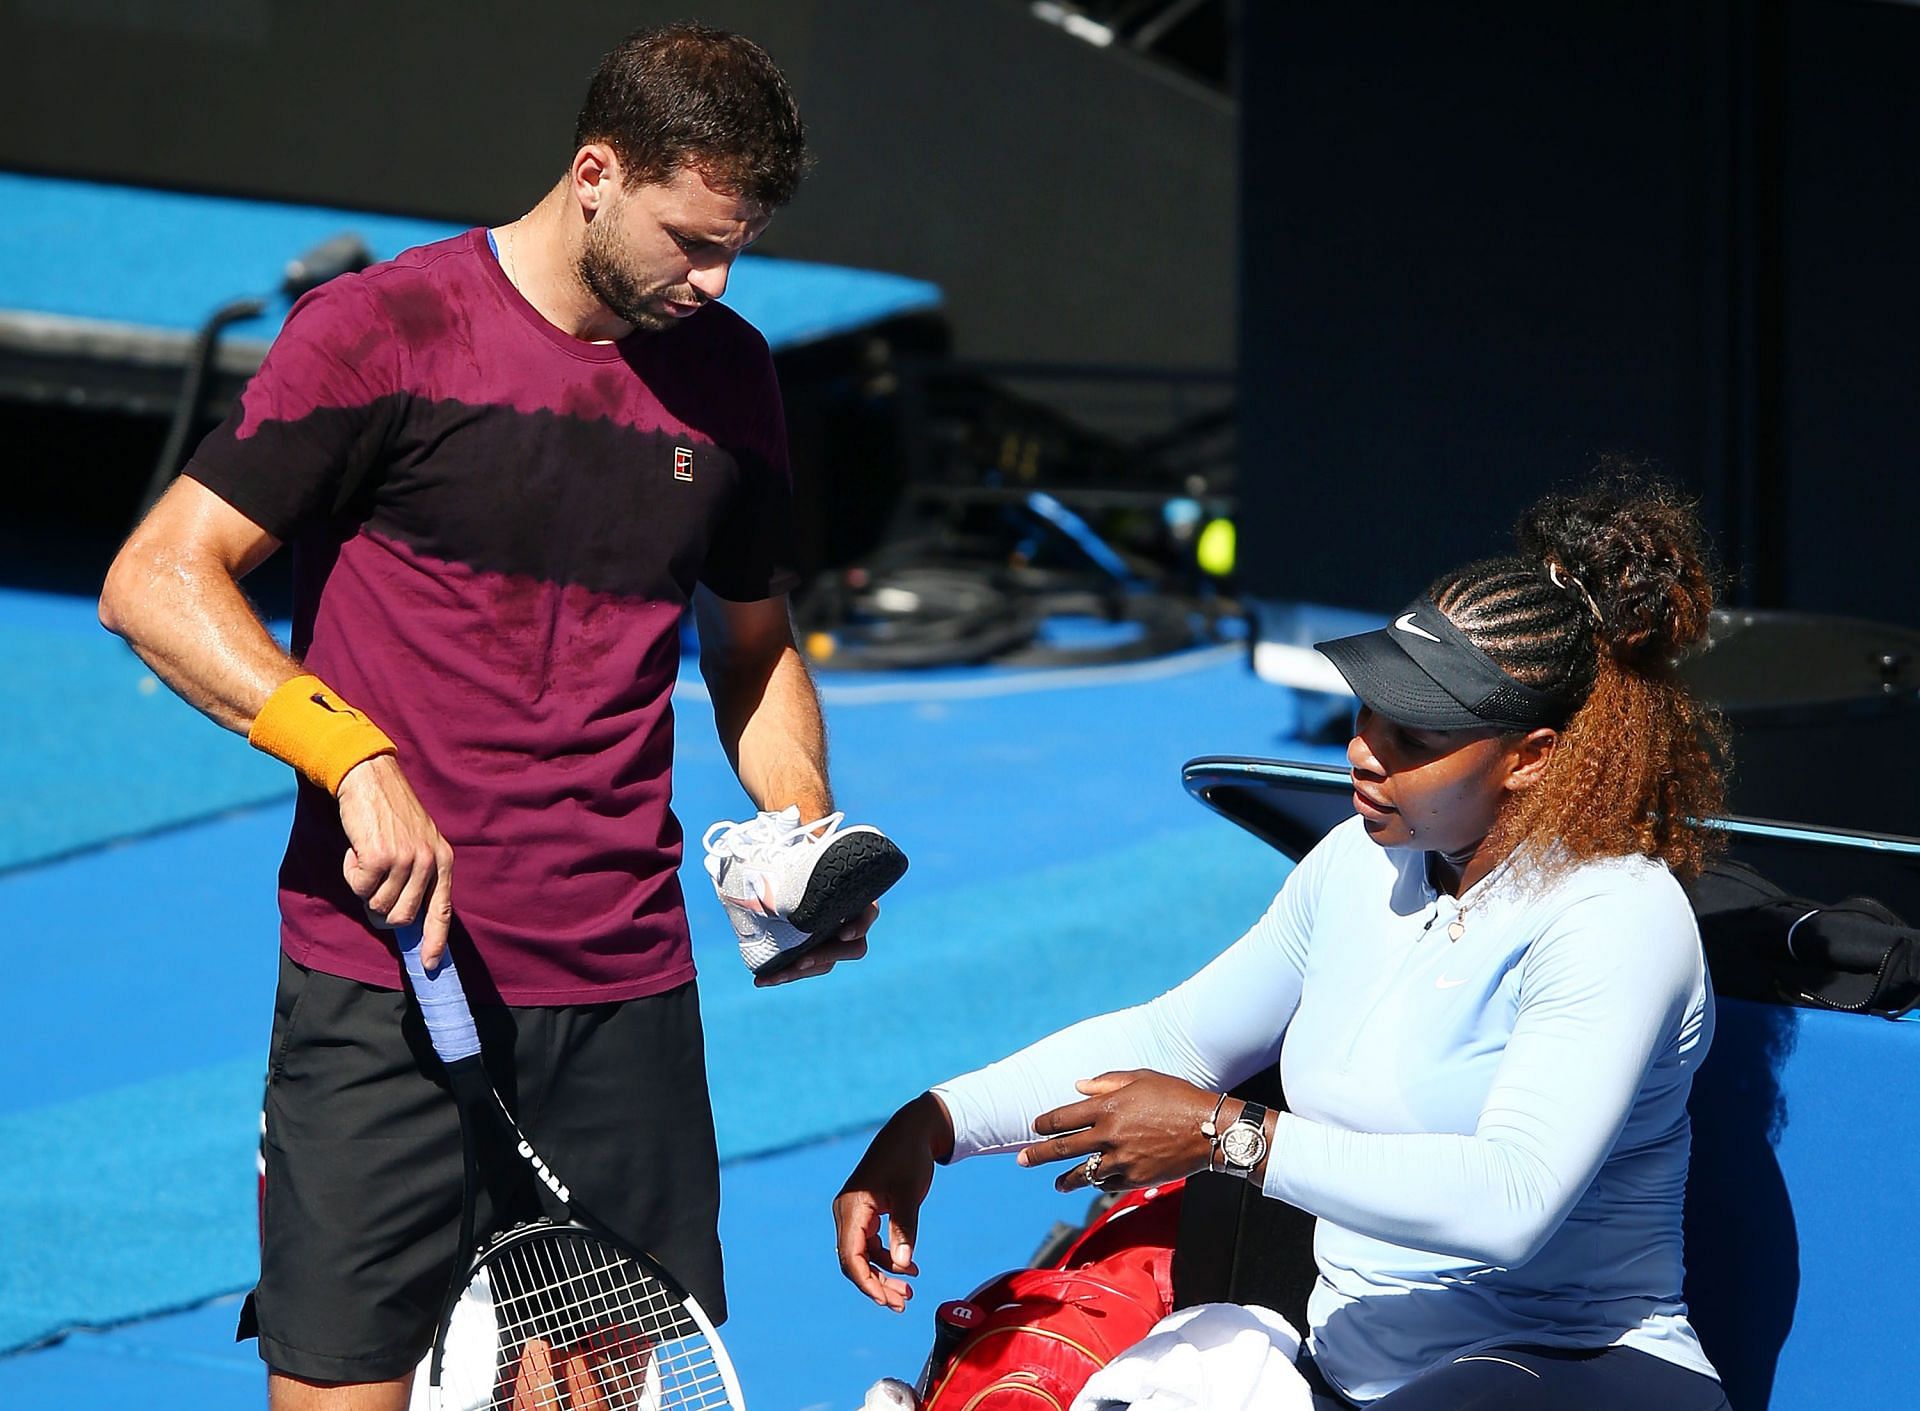 Grigor Dimitrov and Serena Williams at a practice session in the 2019 Australian Open.